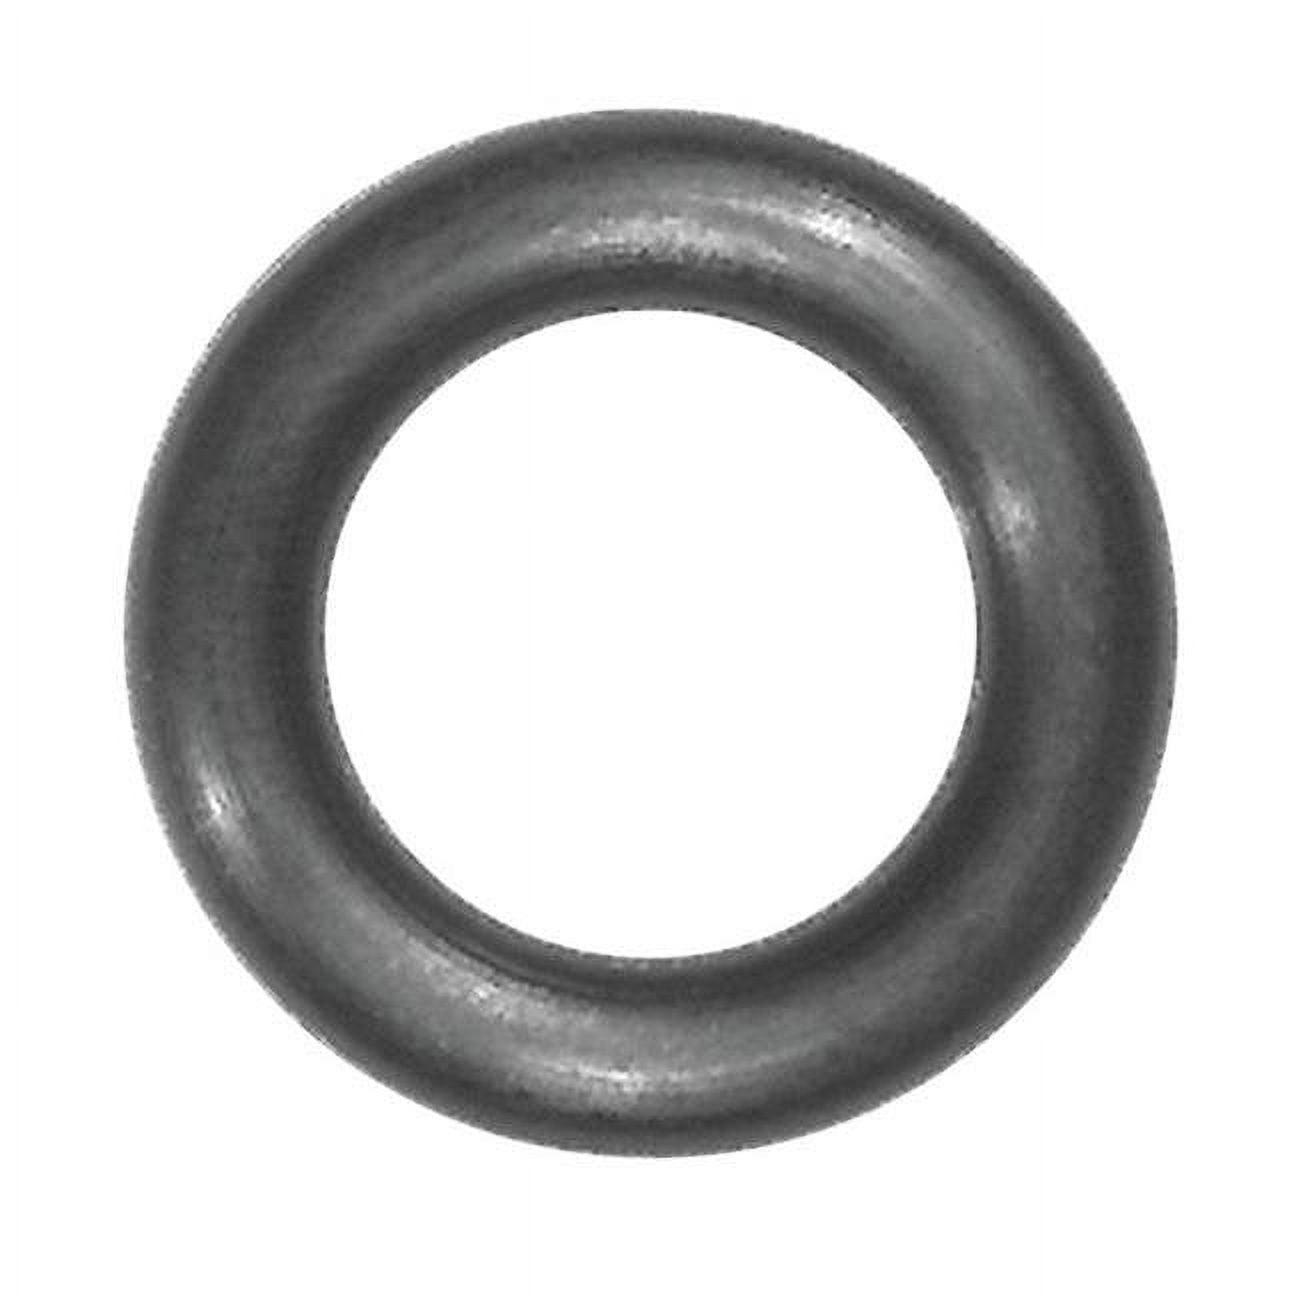 35871b 0.68 X 0.43 X 0.12 In. O-ring Faucet- Pack Of 5